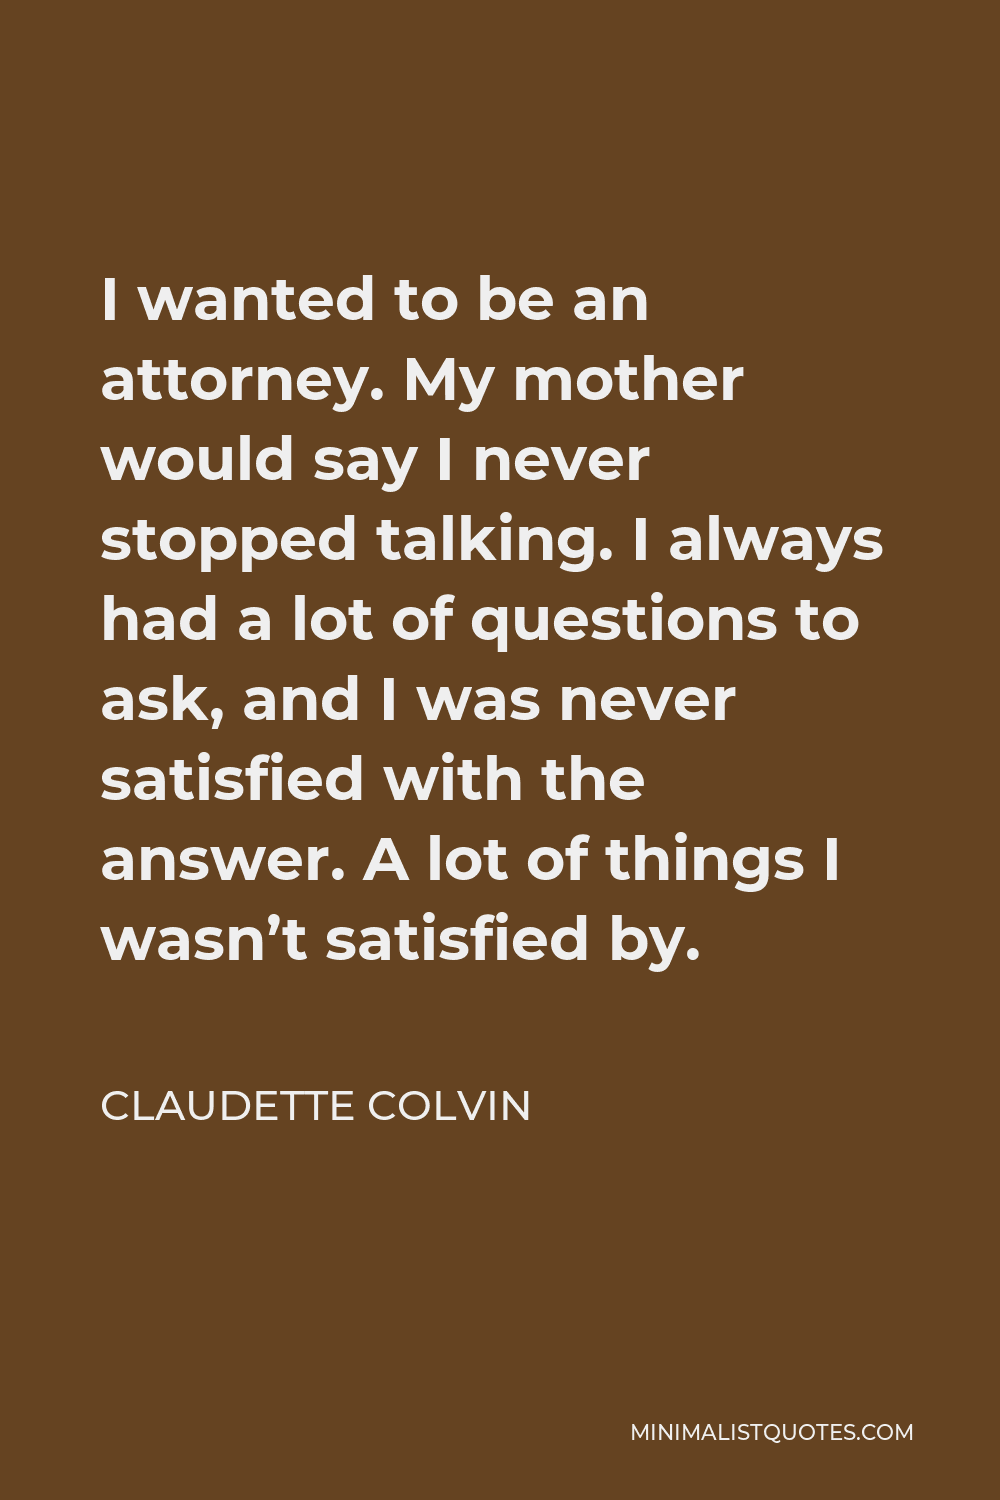 Claudette Colvin Quote - I wanted to be an attorney. My mother would say I never stopped talking. I always had a lot of questions to ask, and I was never satisfied with the answer. A lot of things I wasn’t satisfied by.